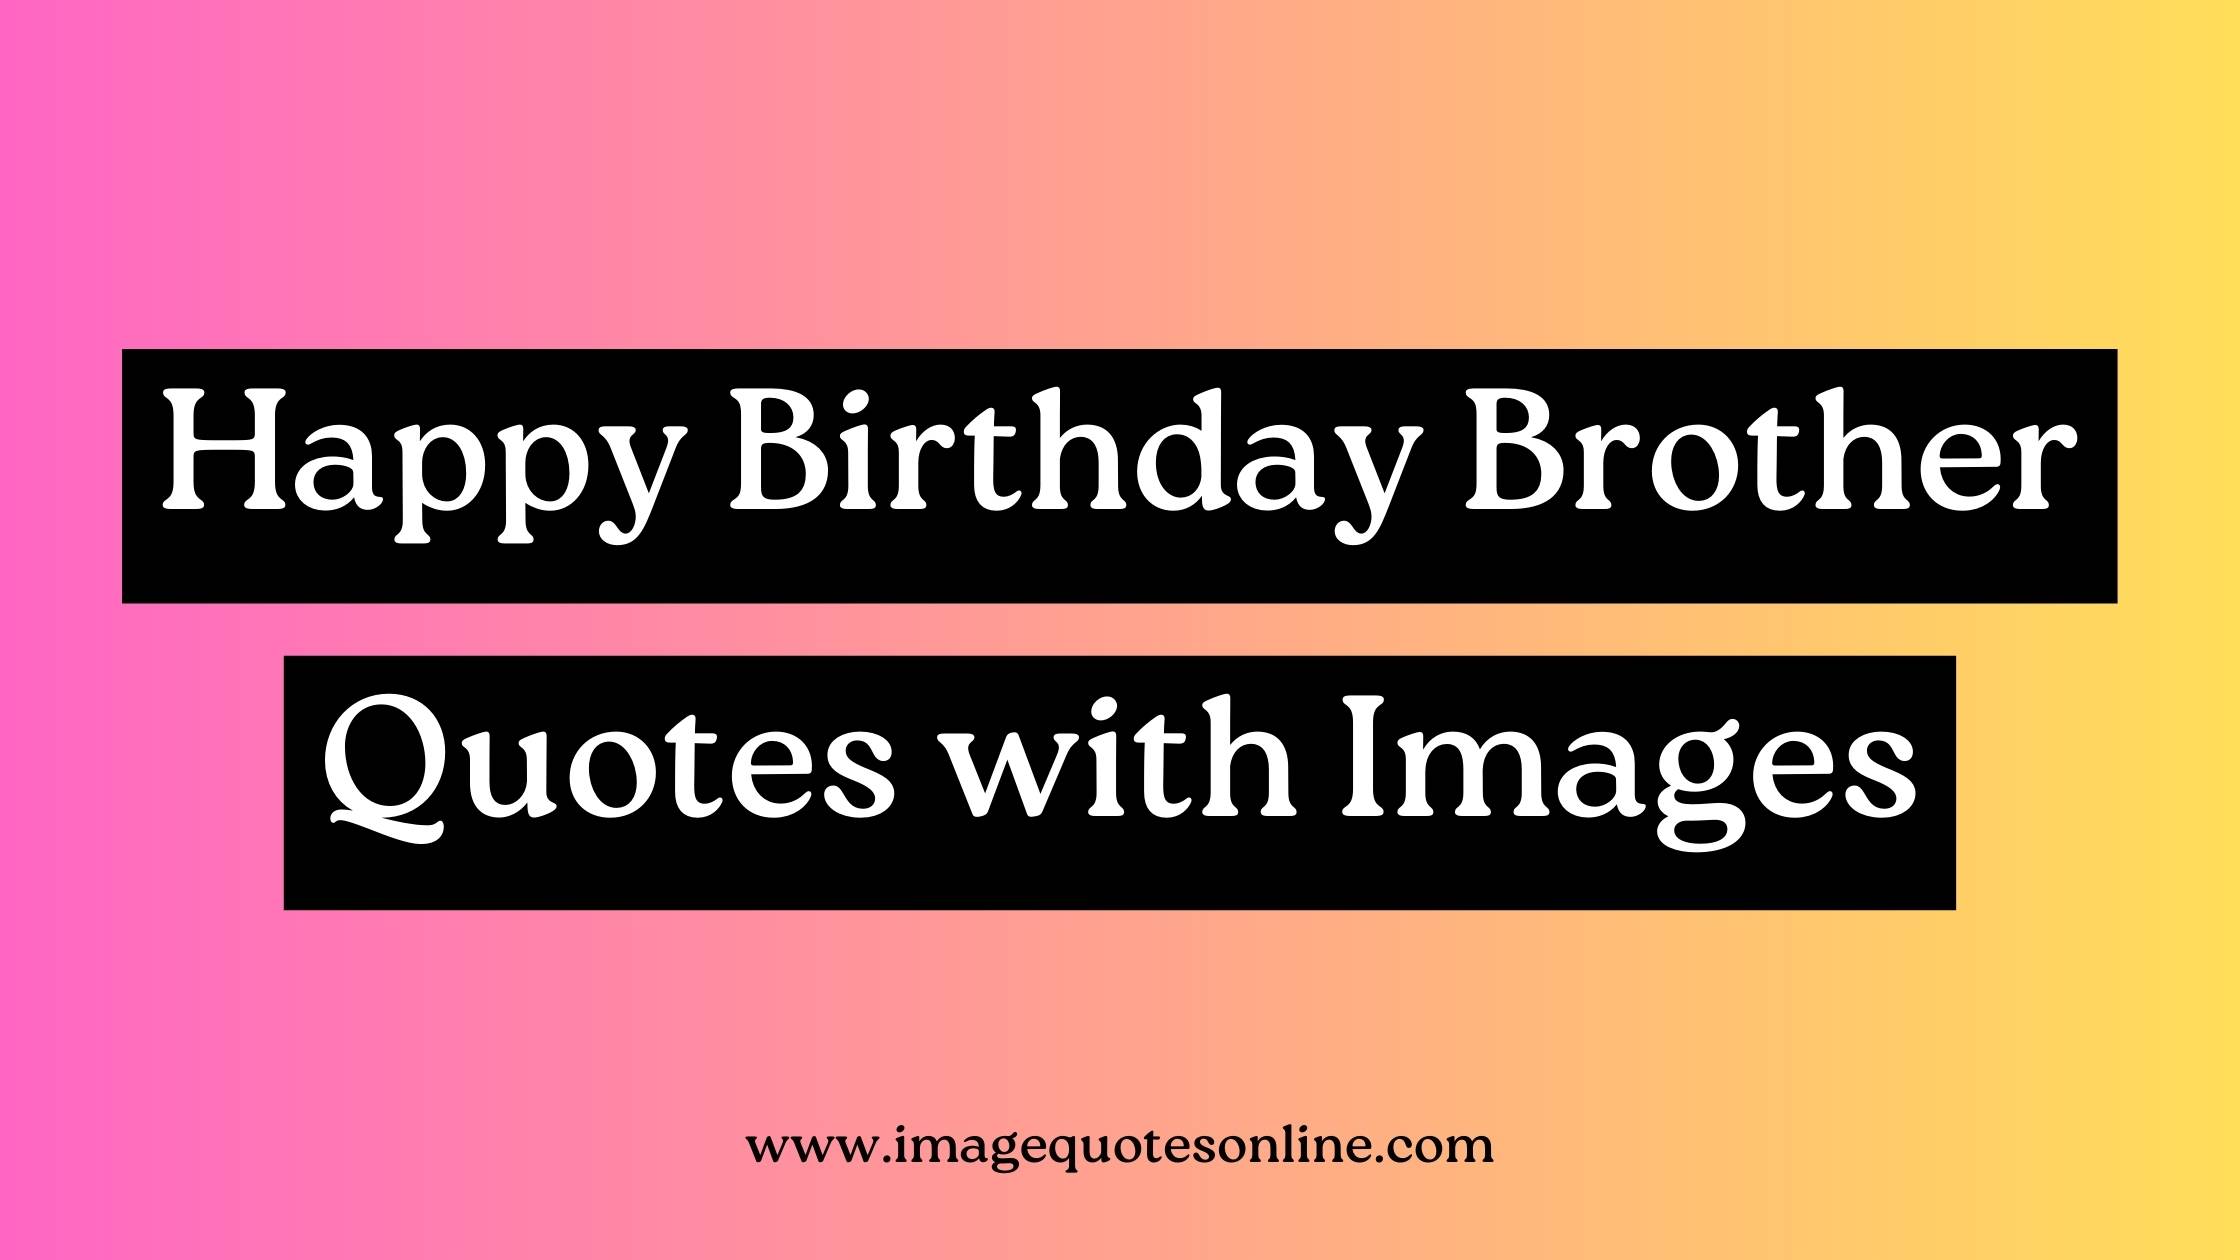 happy birthday brother images with quotes